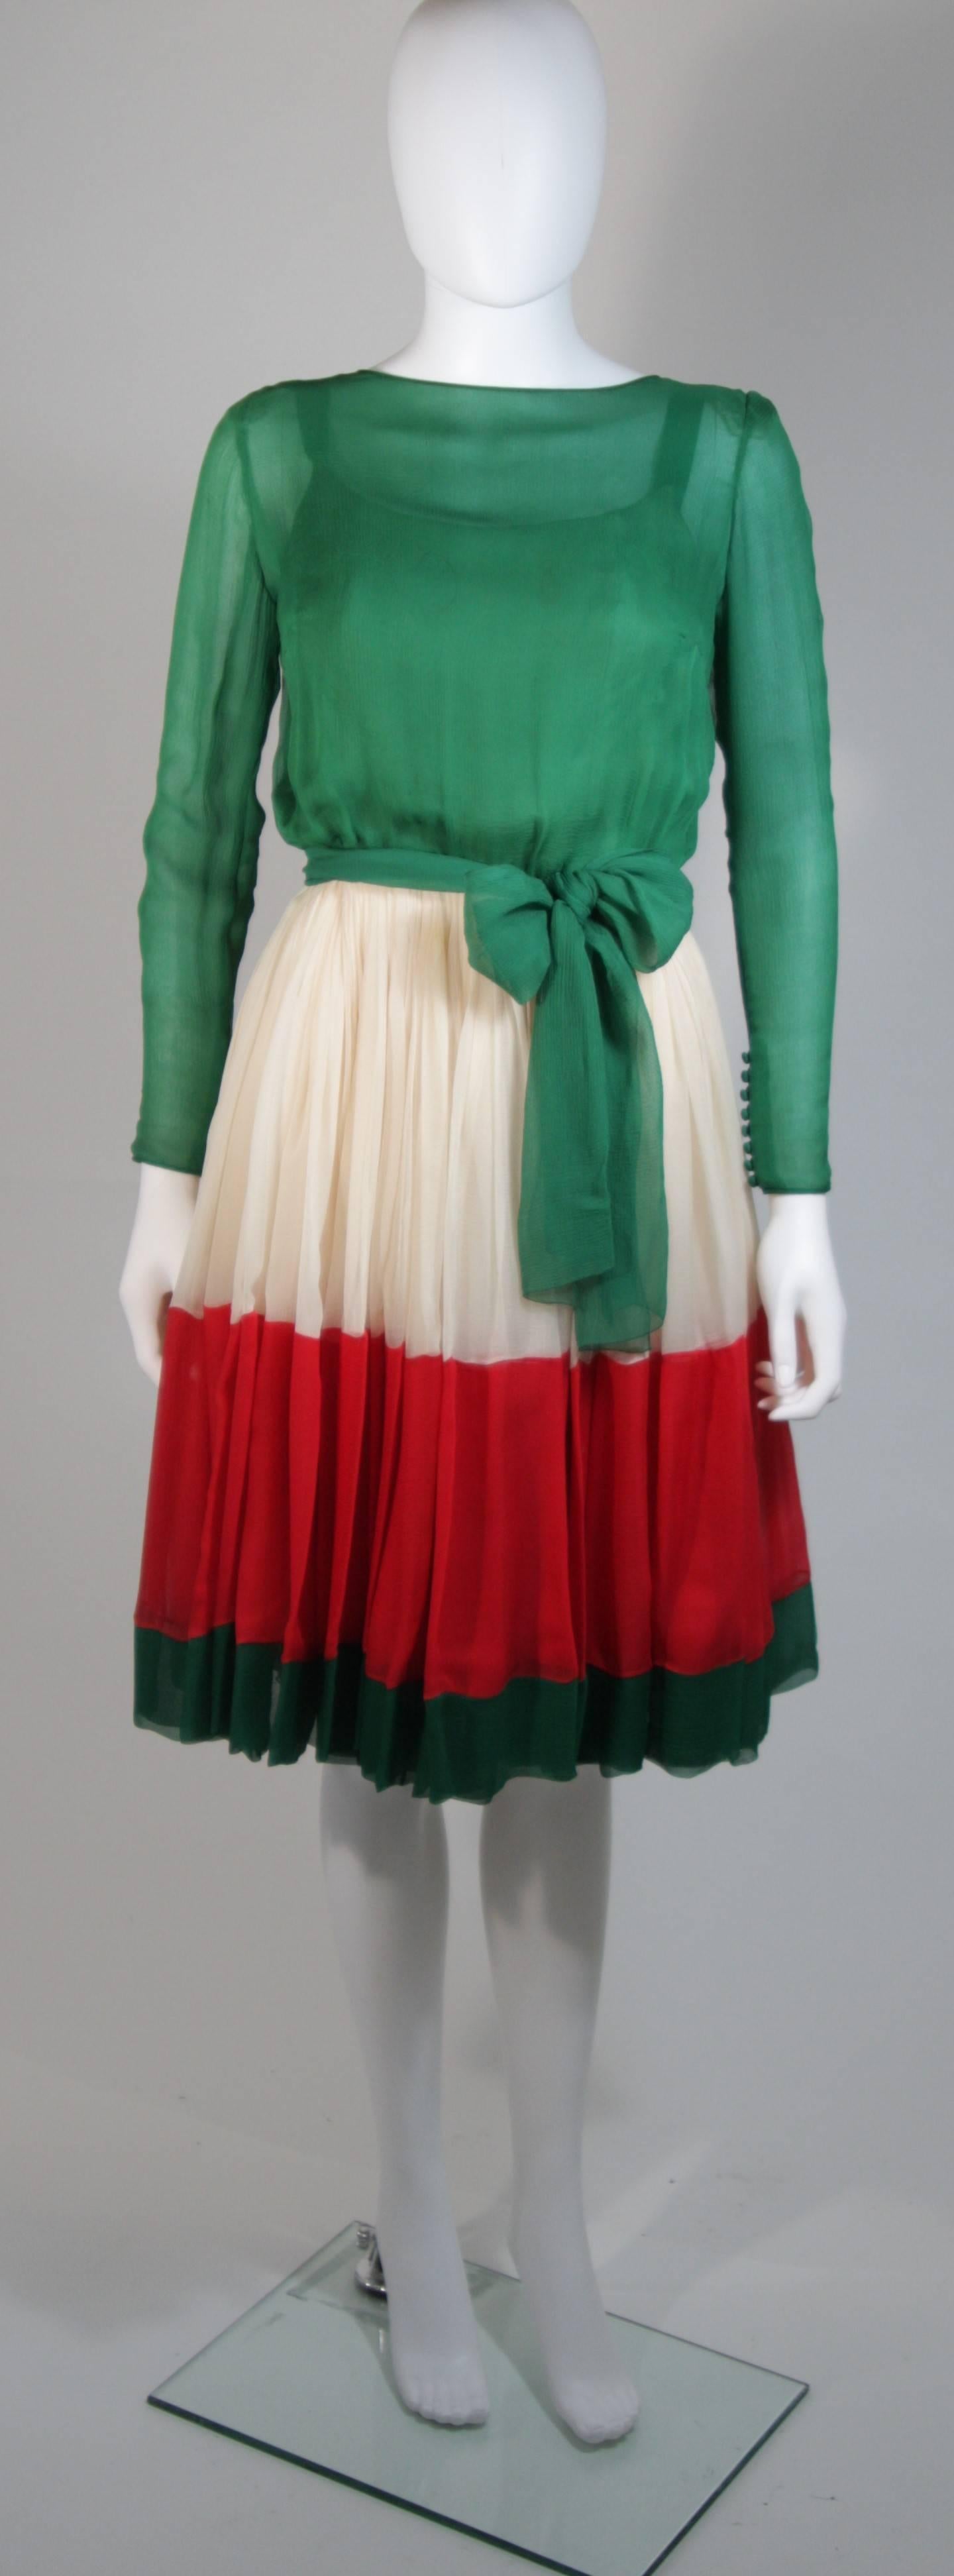 This Galanos cocktail dress is composed of a wonderful silk chiffon in green, cream, and red. The dress features center back button closures. In excellent condition. Made in USA.

**Please cross-reference measurements for personal accuracy. The